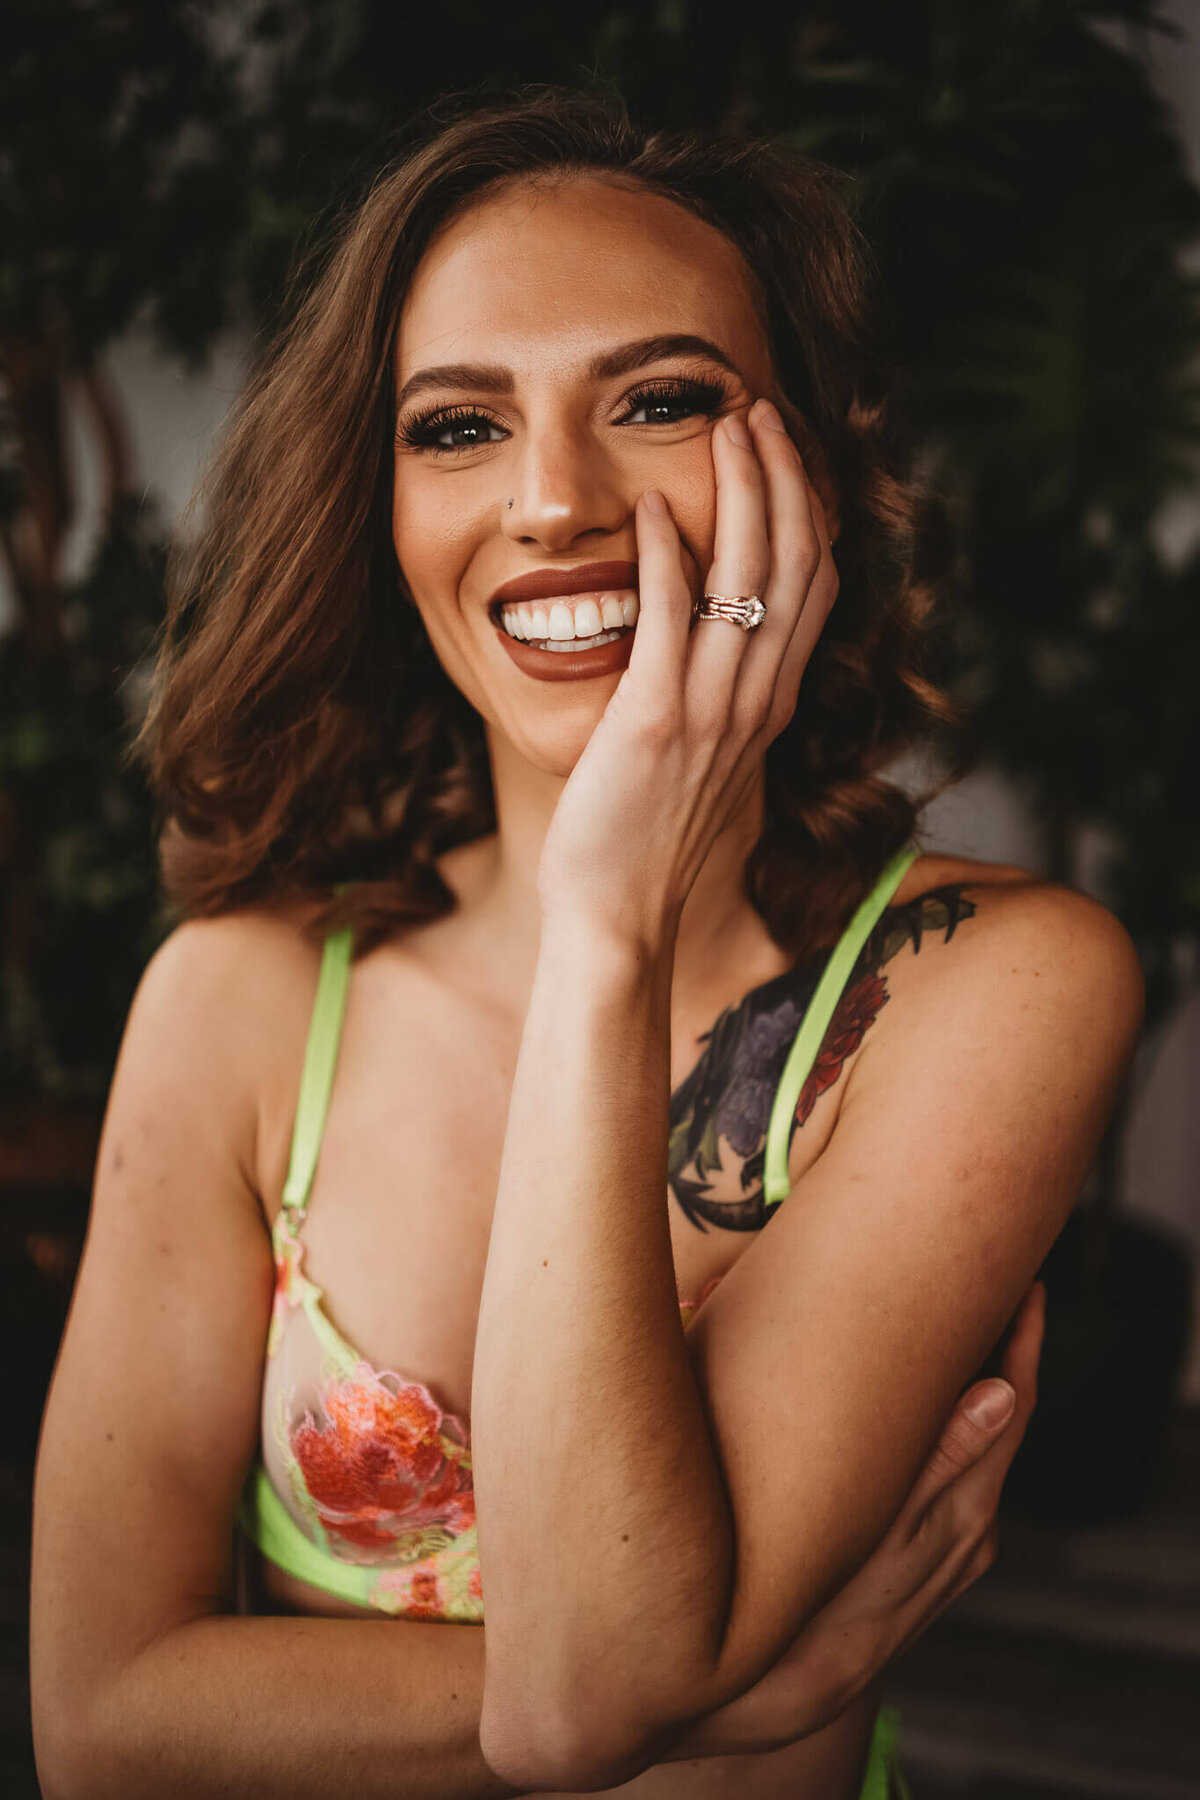 woman wearing neon lingerie smiling at camera with hand on face to show off wedding ring